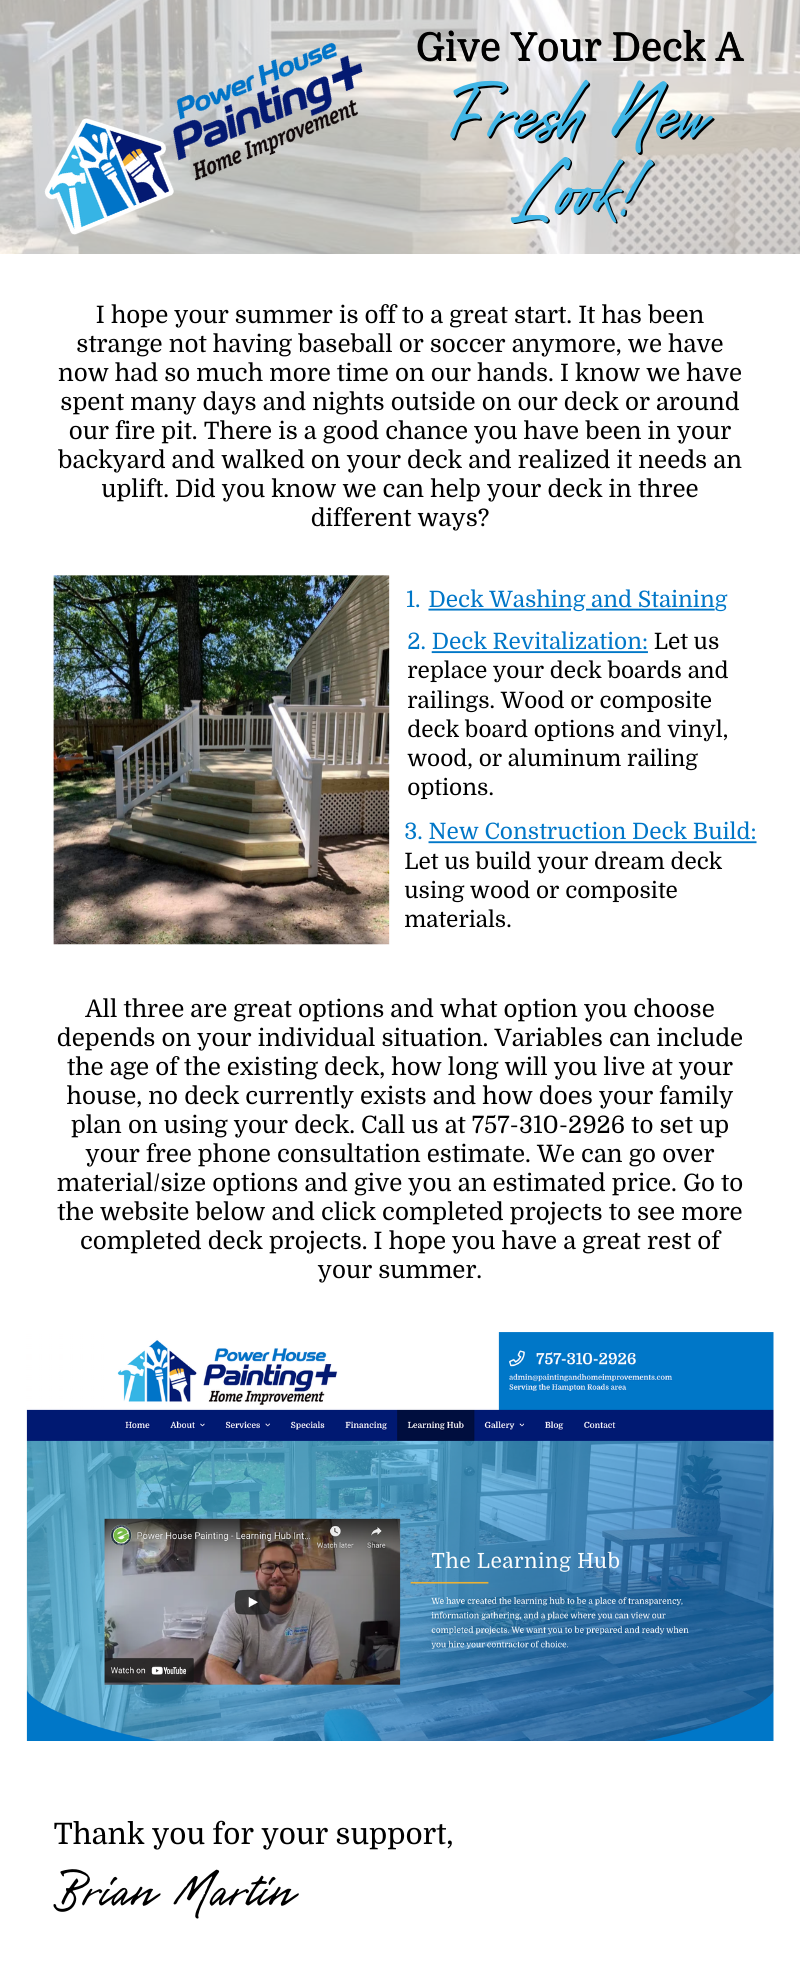 give your deck a fresh new look infographic